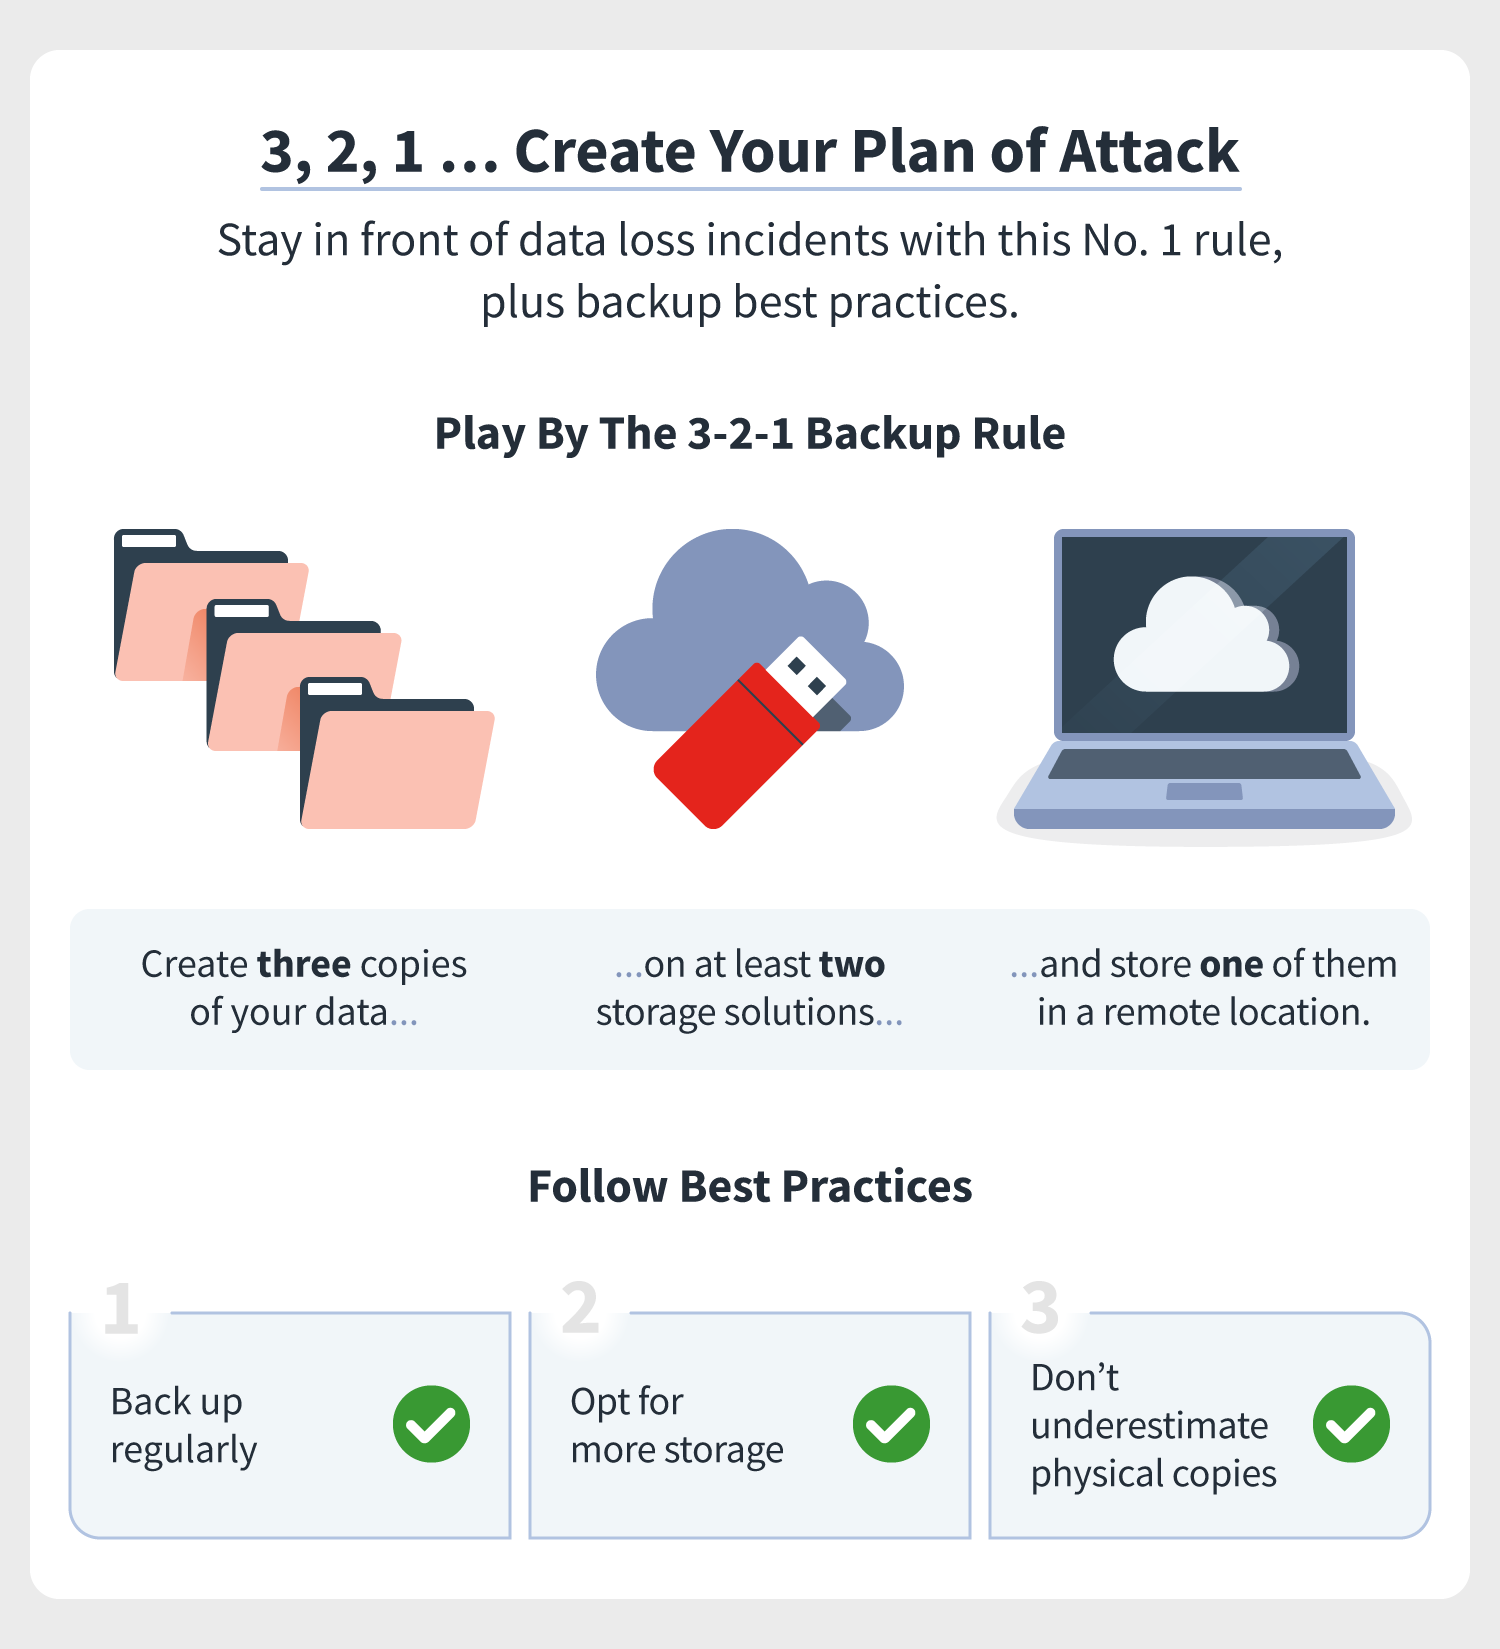 data backup guidelines, including the 3-2-1 backup strategy